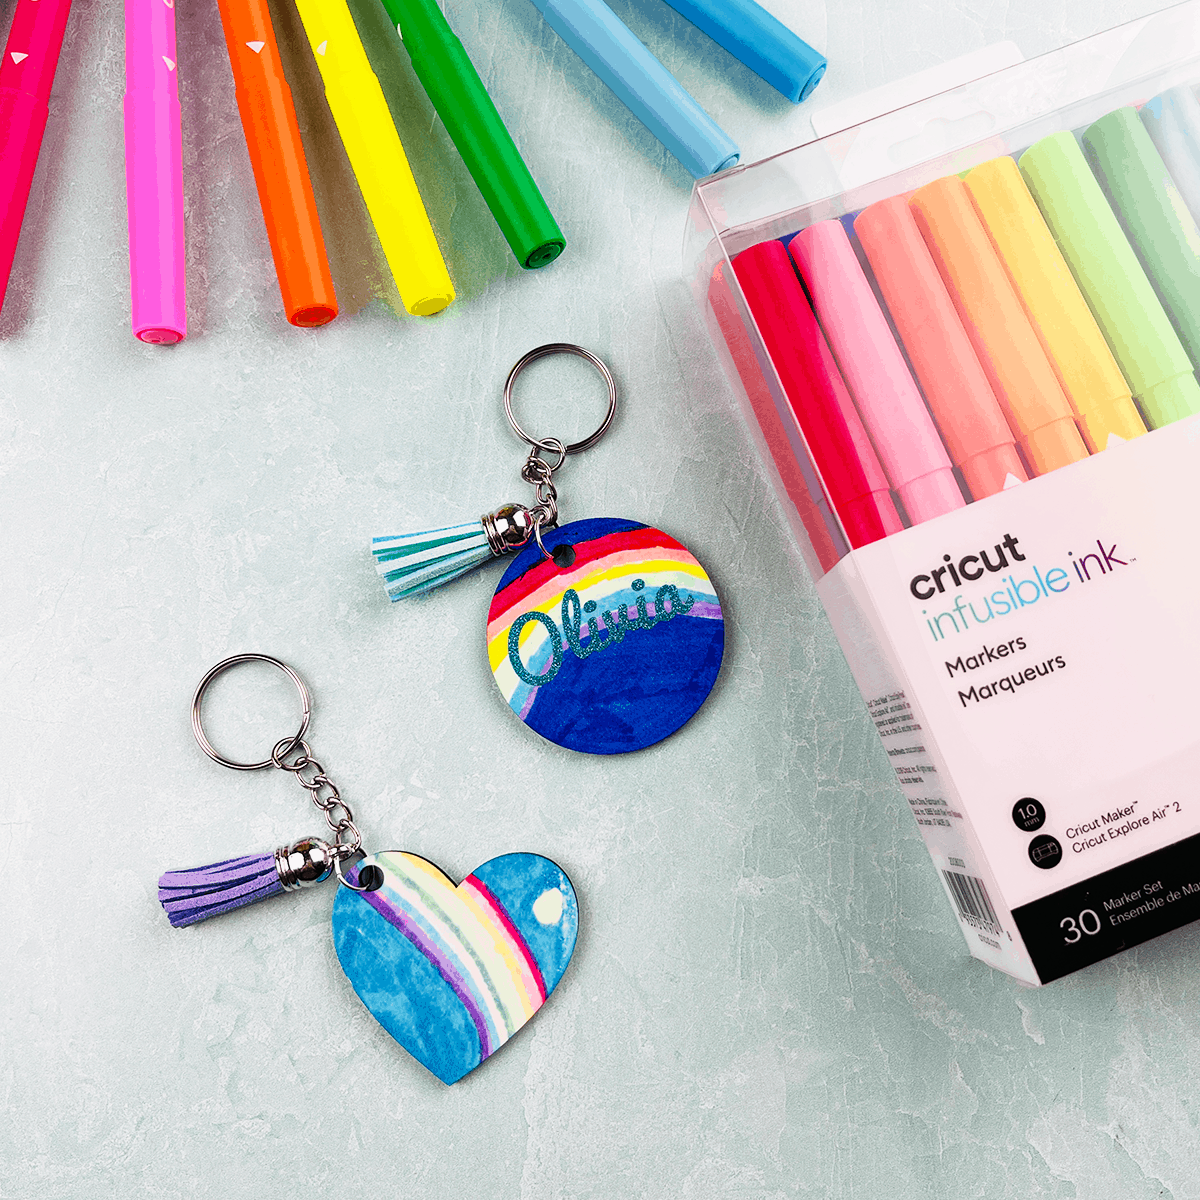 How to Use Cricut Infusible Ink Markers to Make A Keychain